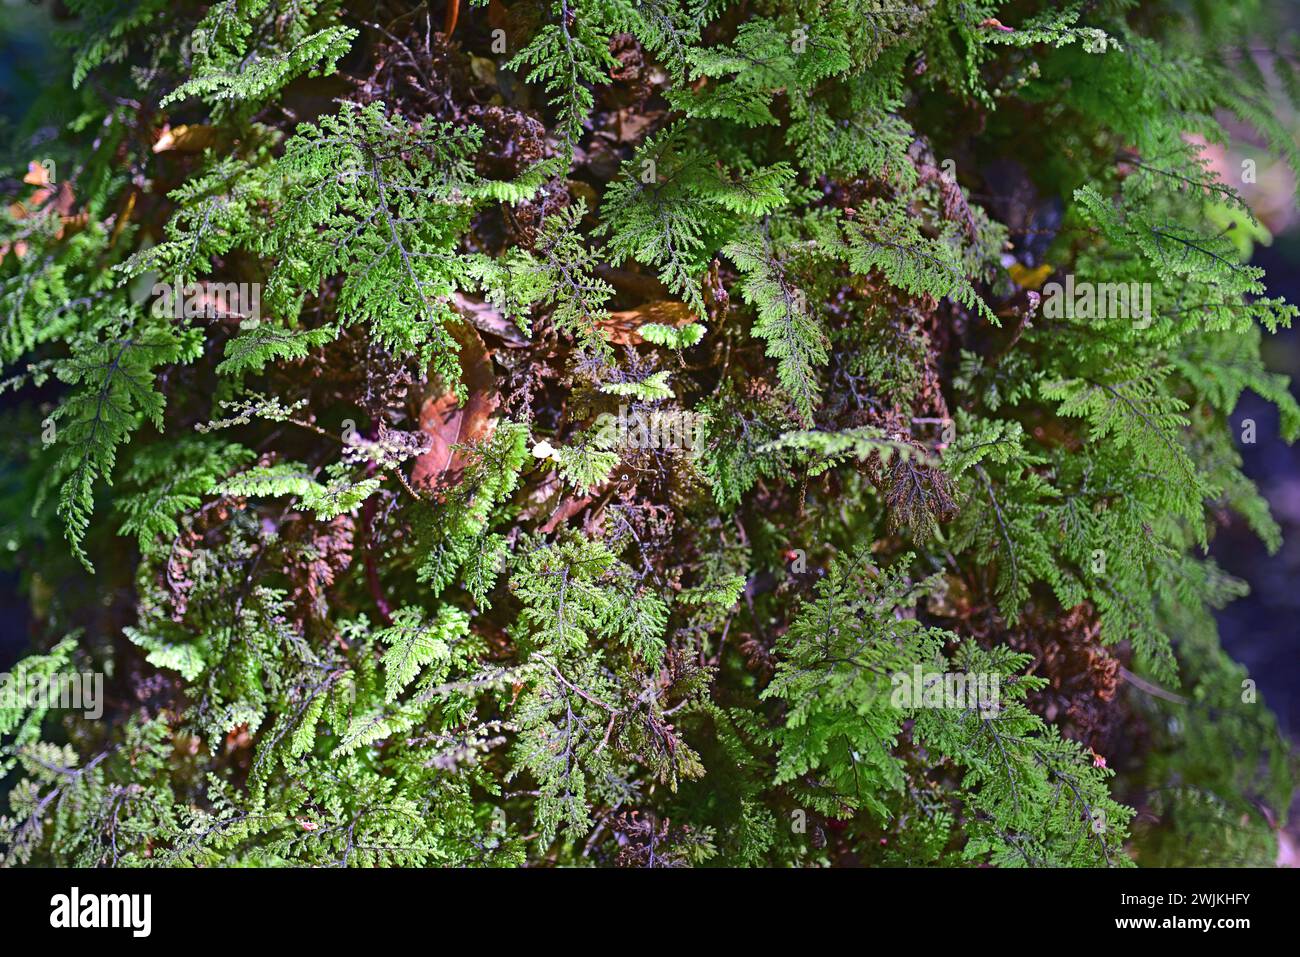 Hymenophyllum plicatum is a fern endemic to Argentina and Chile. This photo was taken in Vicente Perez Rosales National Park, Region de los Lagos, Chi Stock Photo